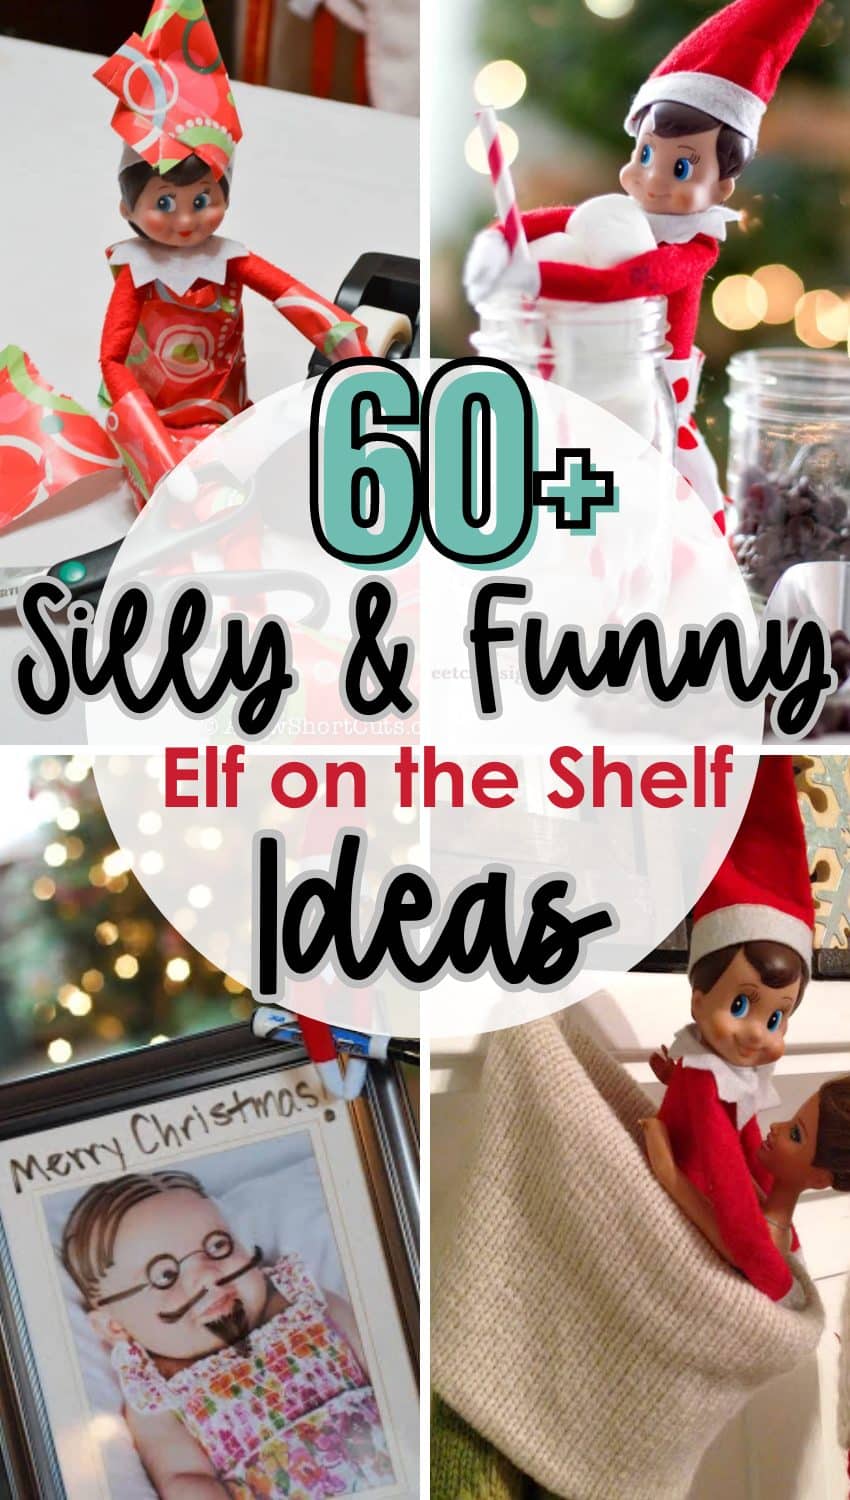 Silly and Funny Elf on the Shelf Ideas